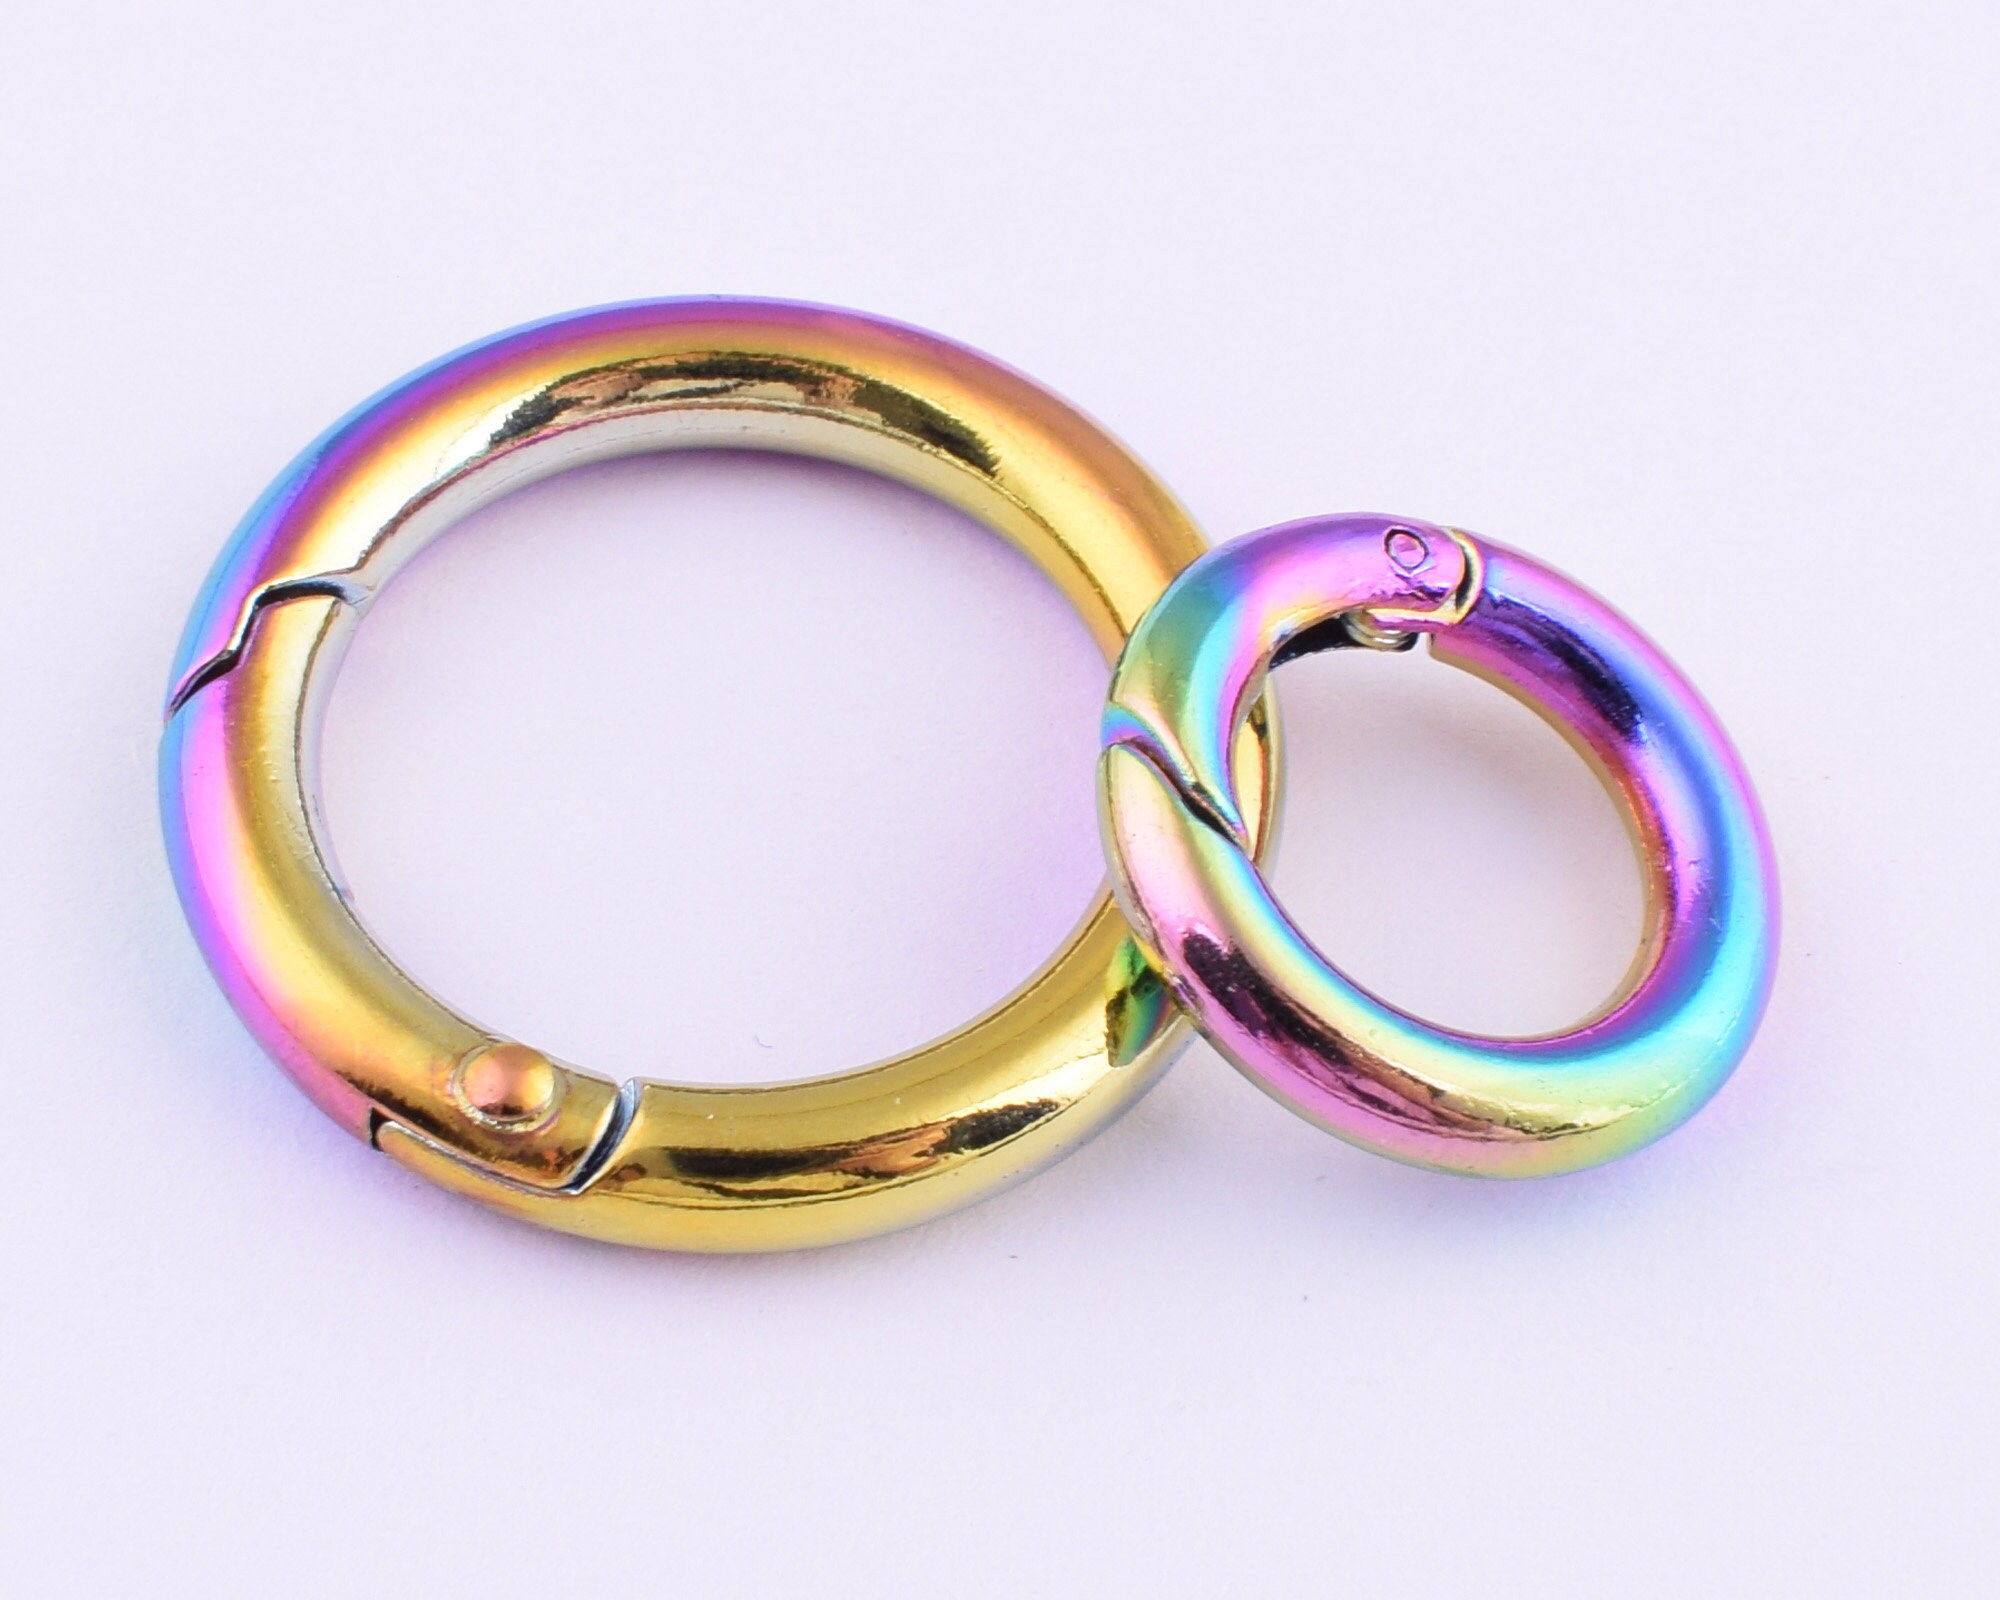  2 Pcs O Ring for Purse Strap,1 inch Spring Rings for